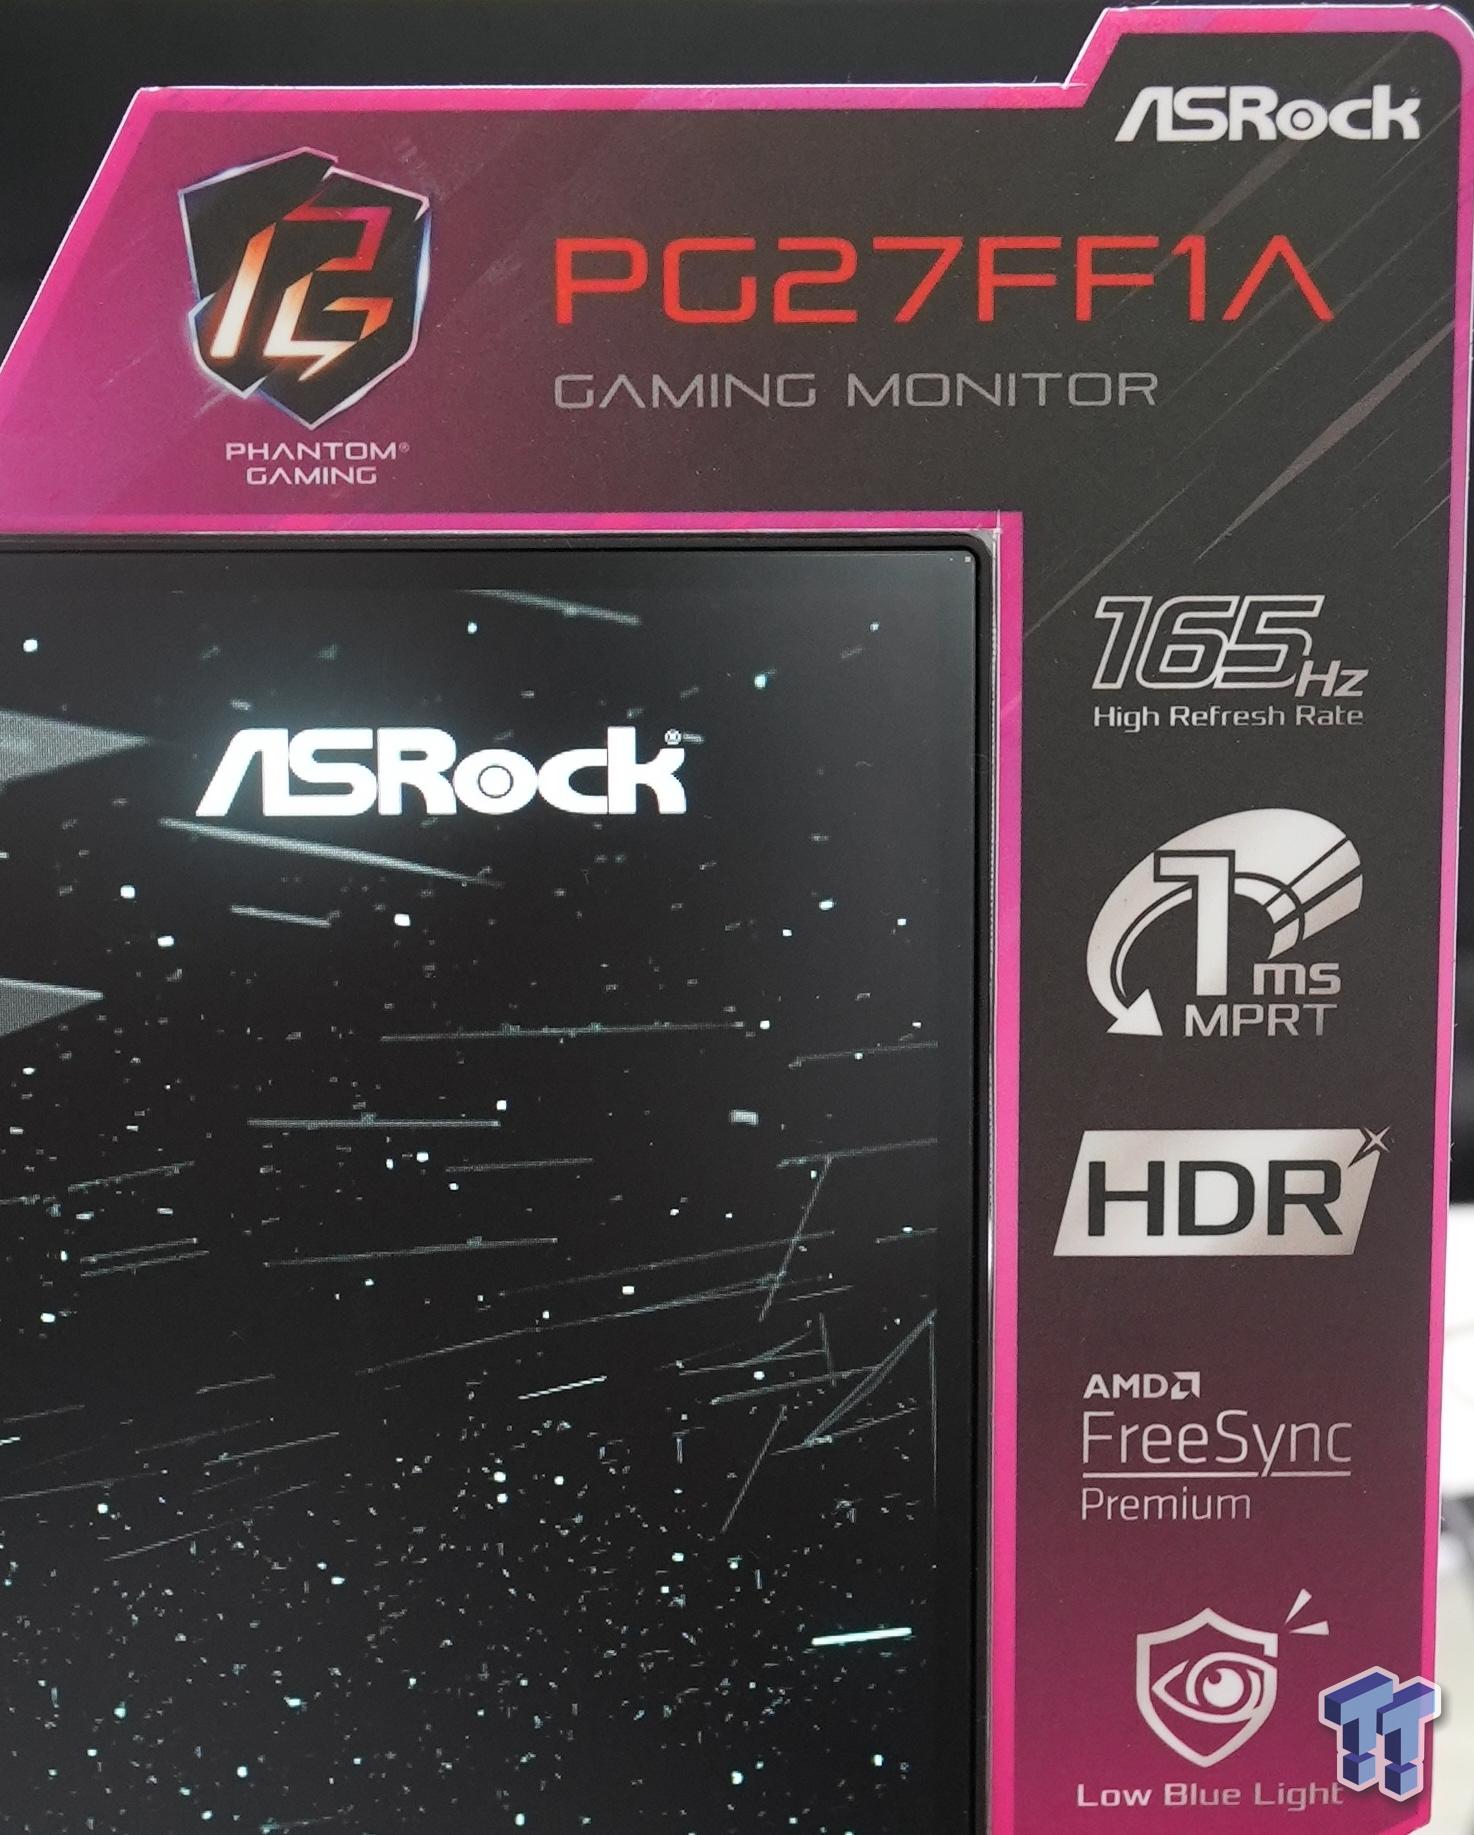 ASRock showcases its newly announced 1440p and 1080p gaming monitors